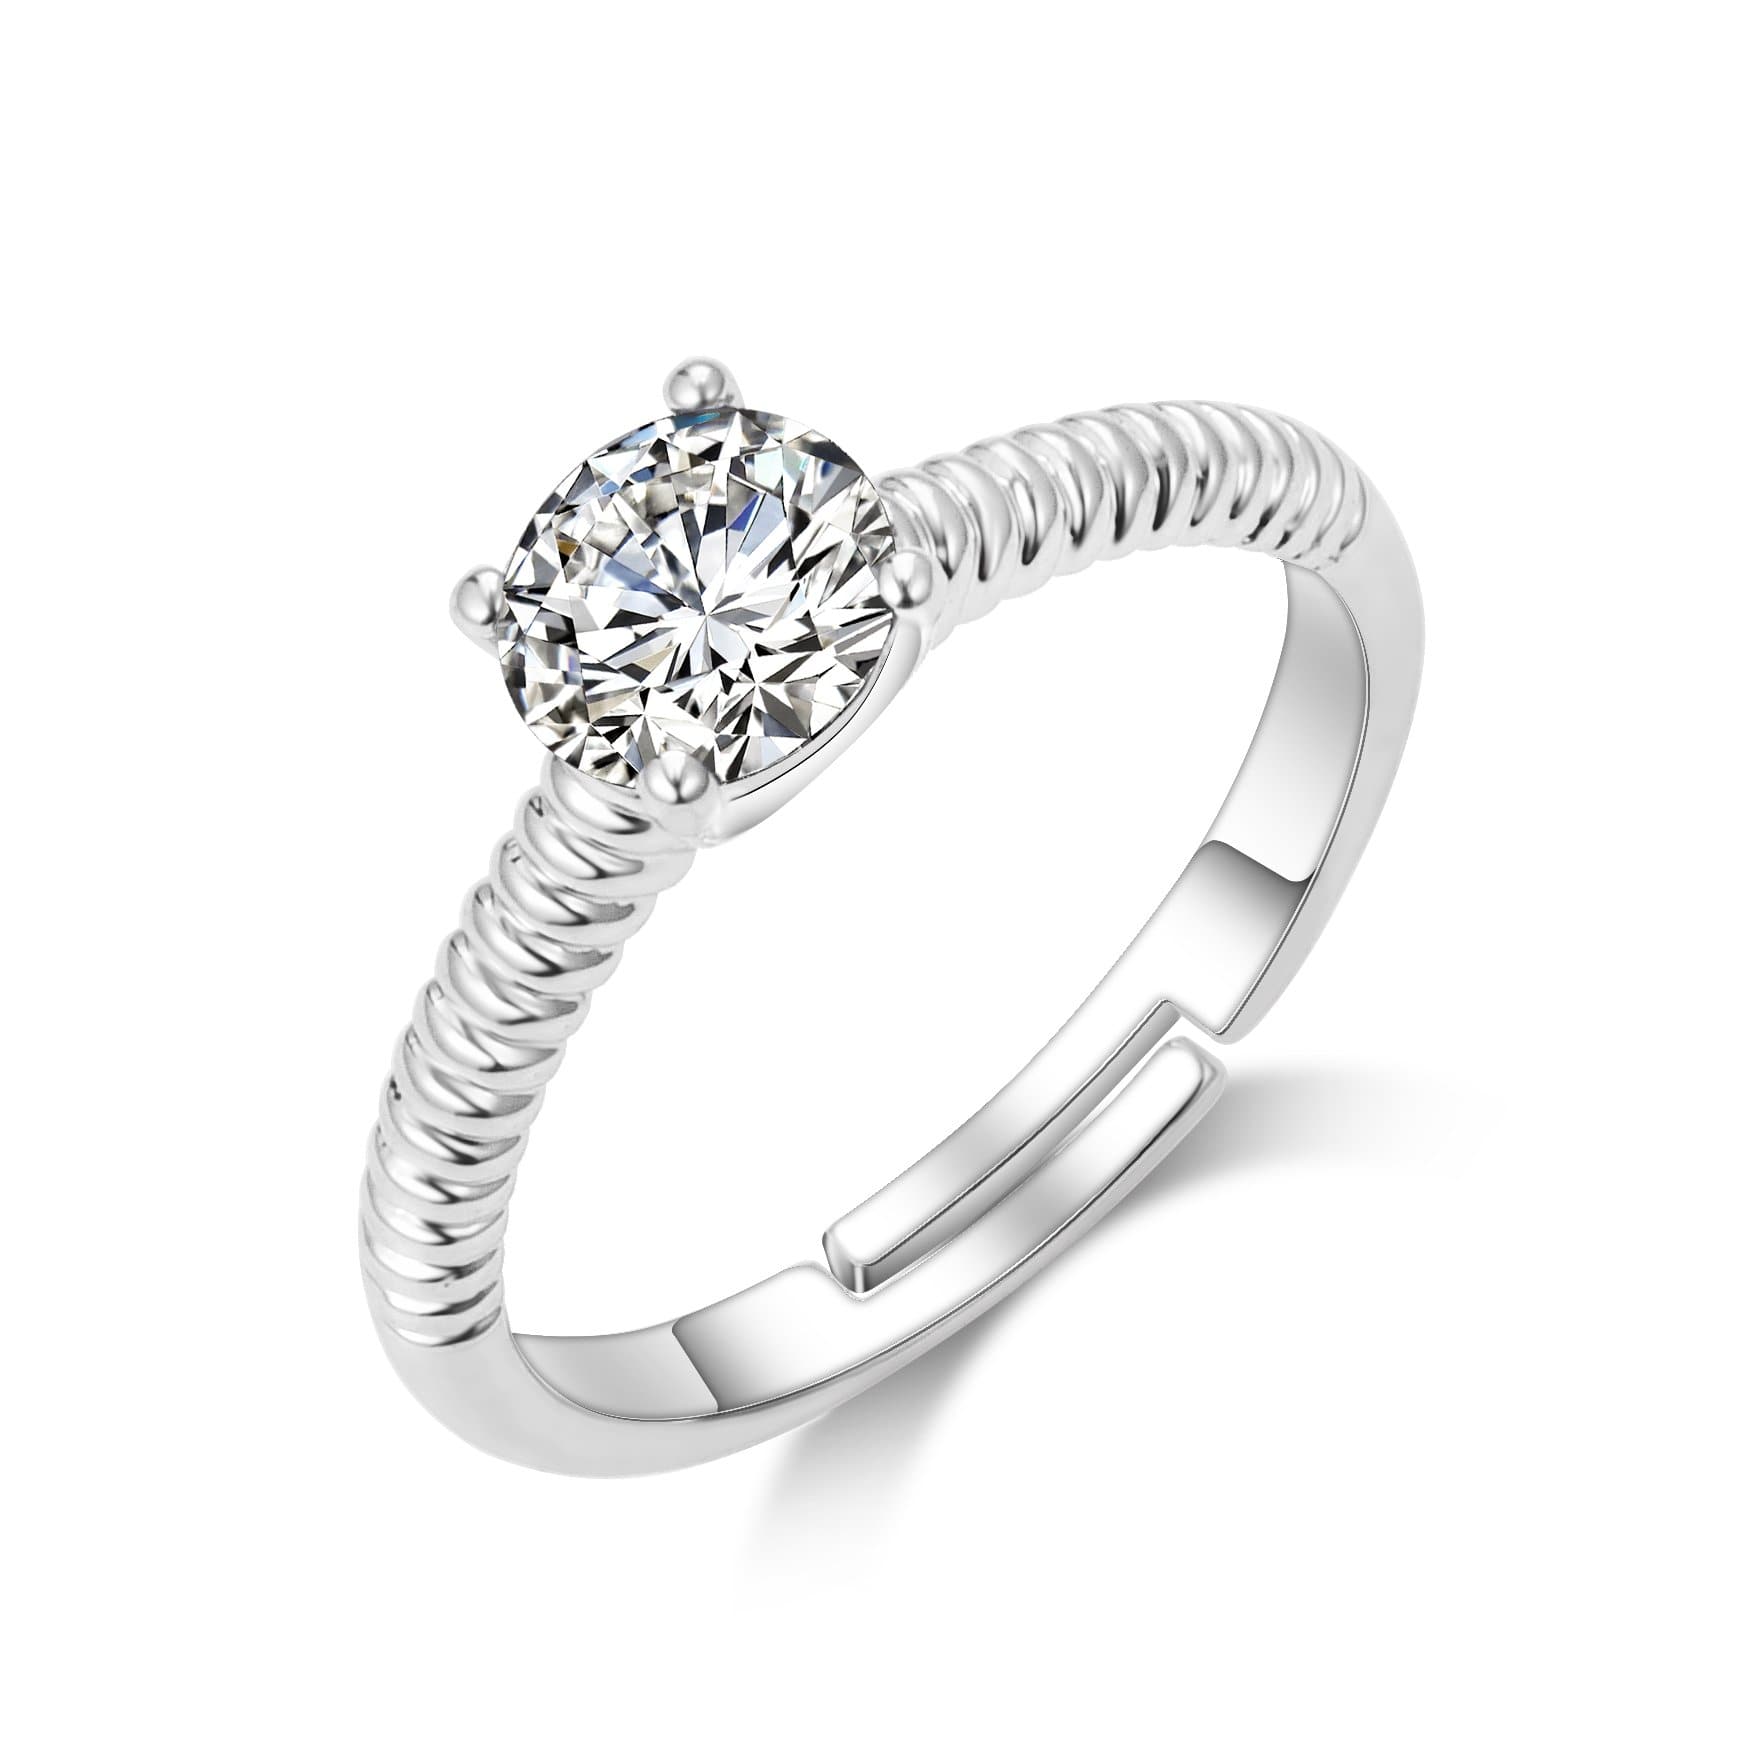 Adjustable Crystal Ring Created with Zircondia® Crystals